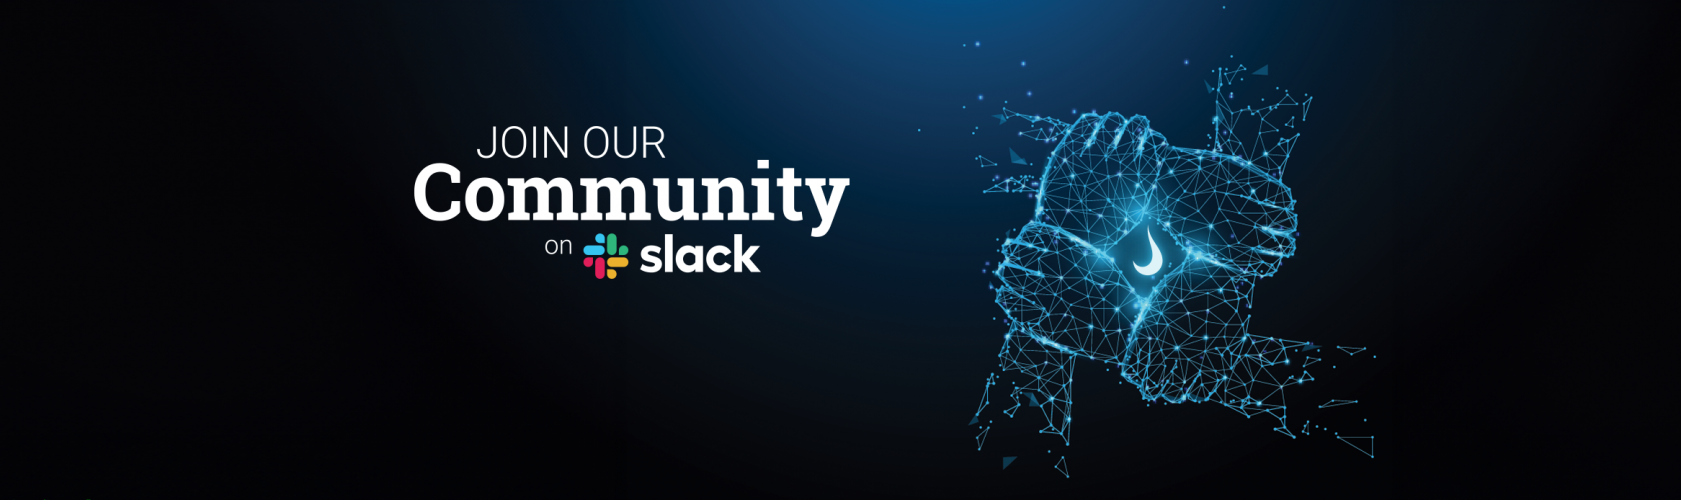 Join Our Community on Slack